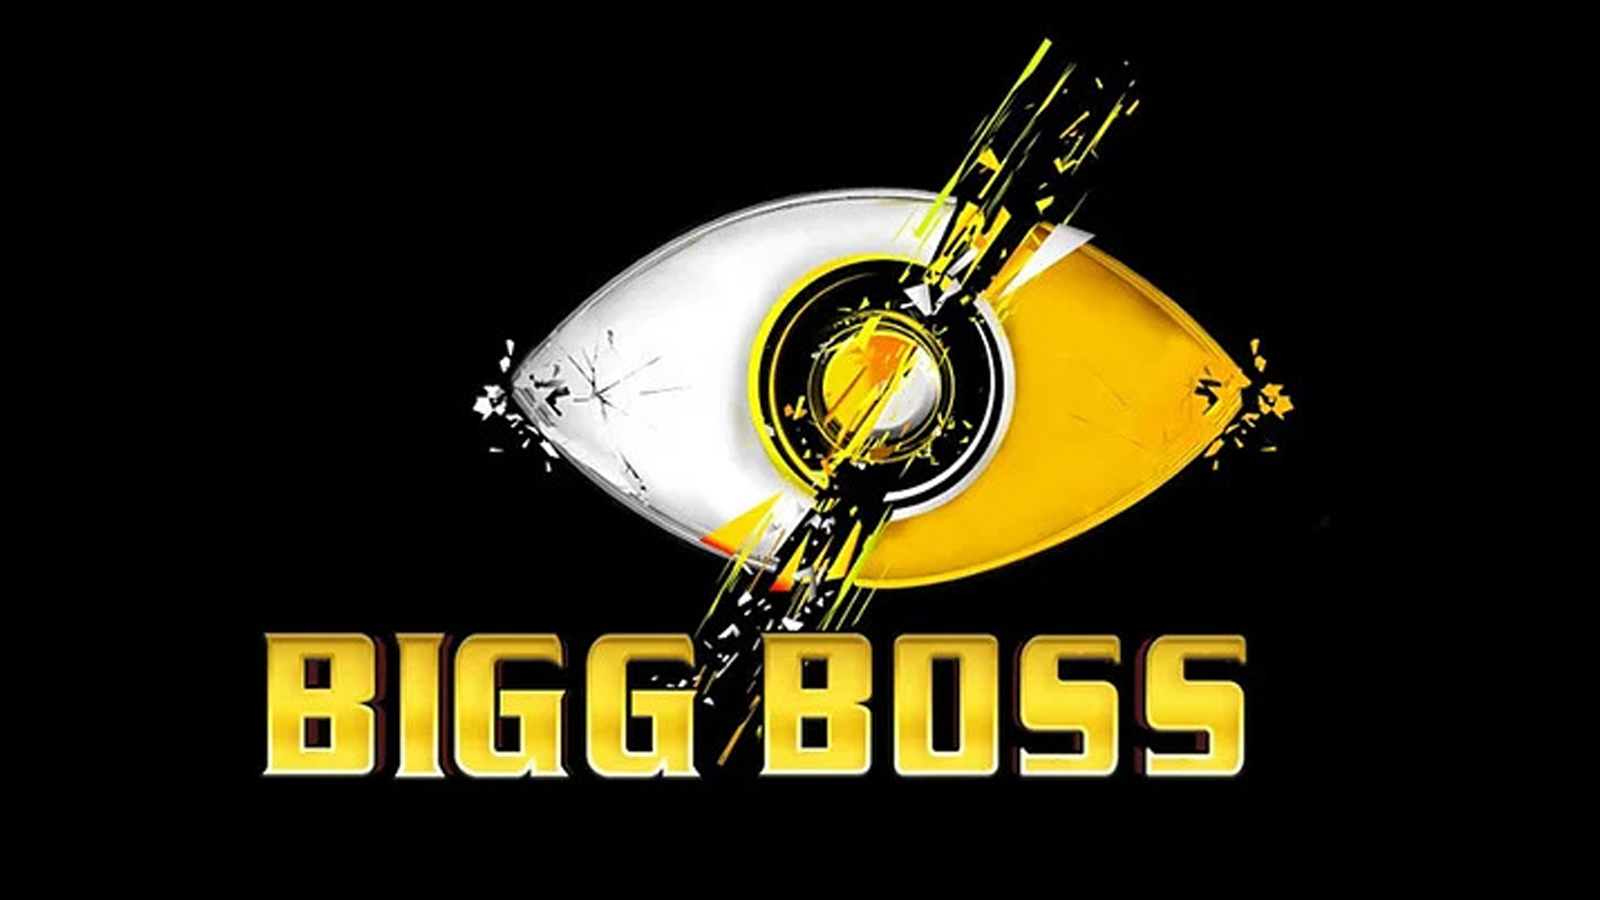 Endemol Shine India celebrates the launch of the 25th Season of the Bigg Boss franchise in India